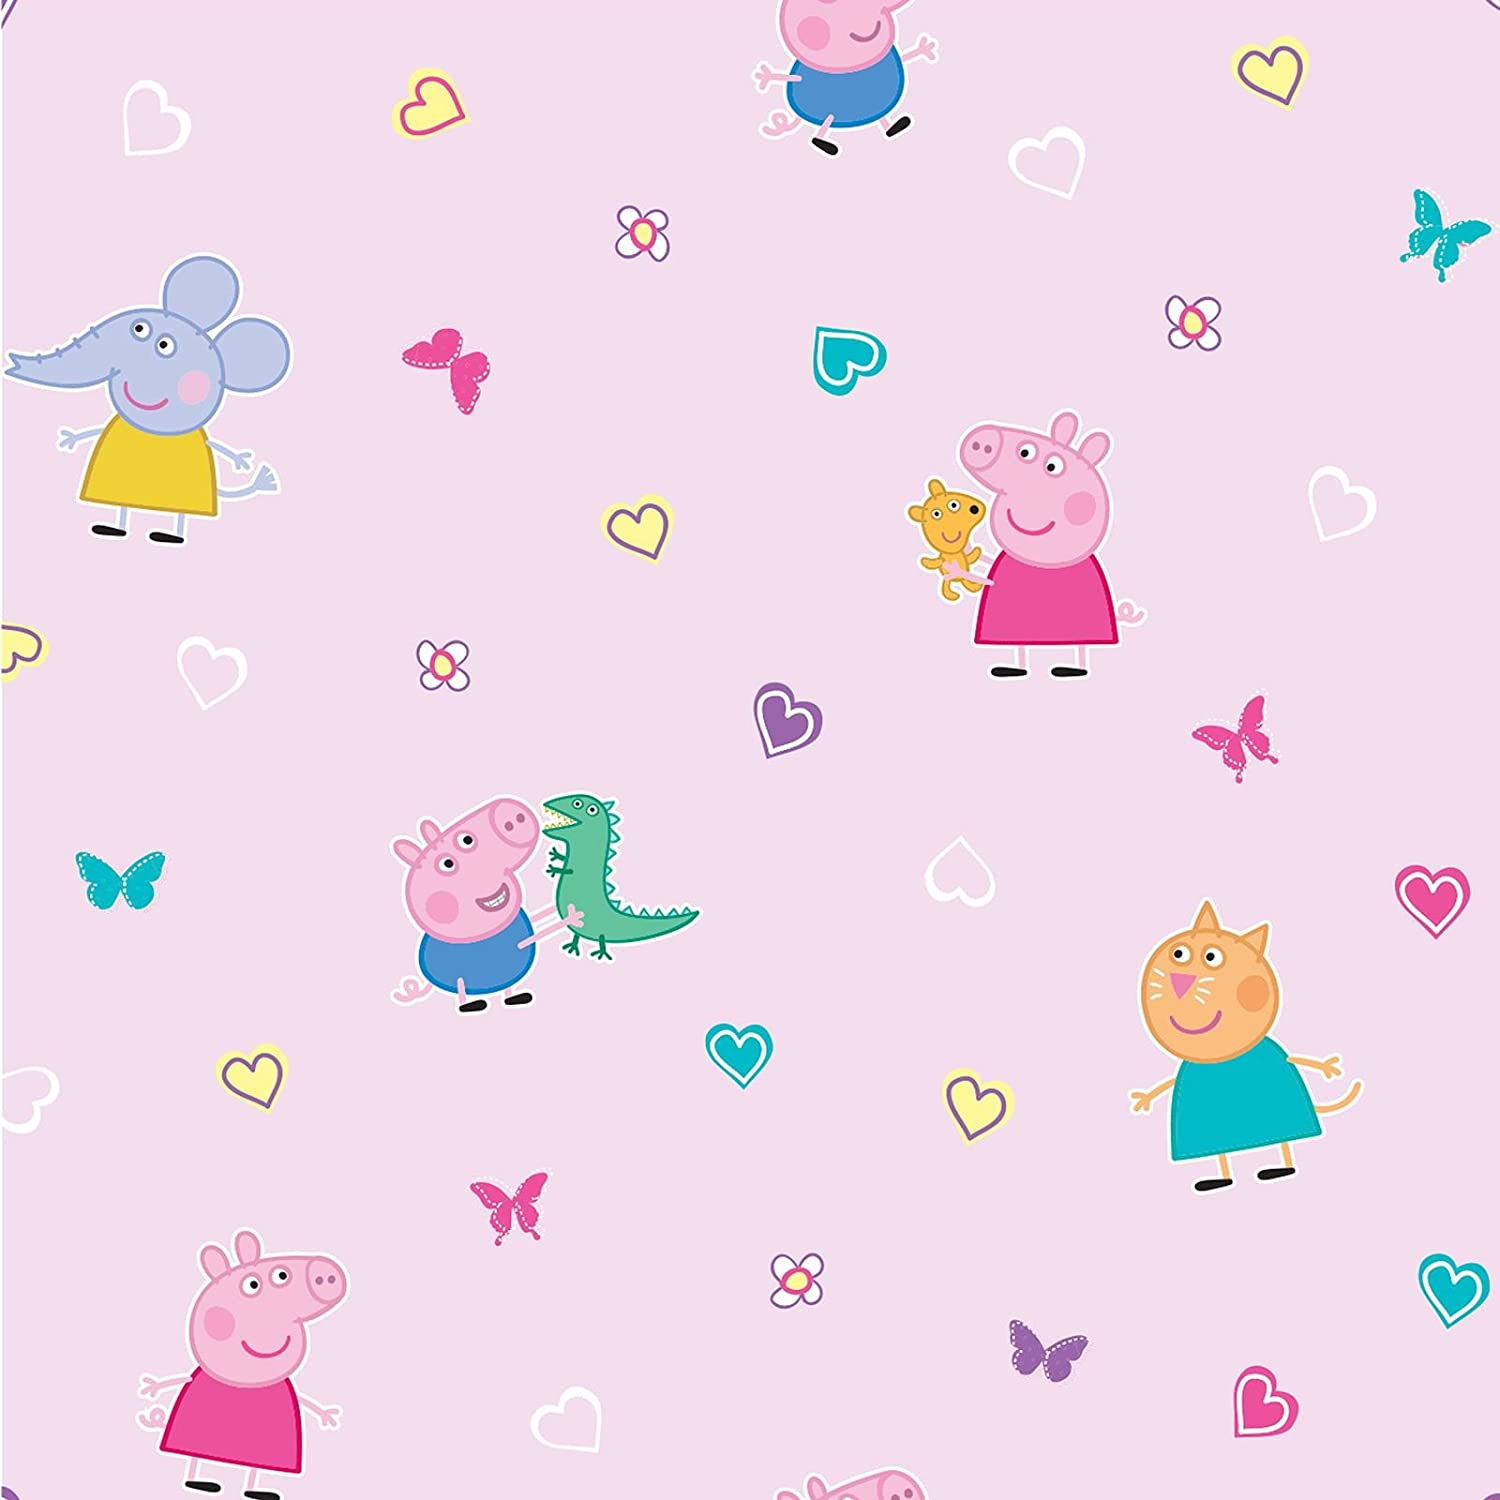 Peppa Pig Pink Heart Butterfly Childrens George Pig Emily Elephant Candy Cat Wallpaper: Amazon.co.uk: DIY & Tools